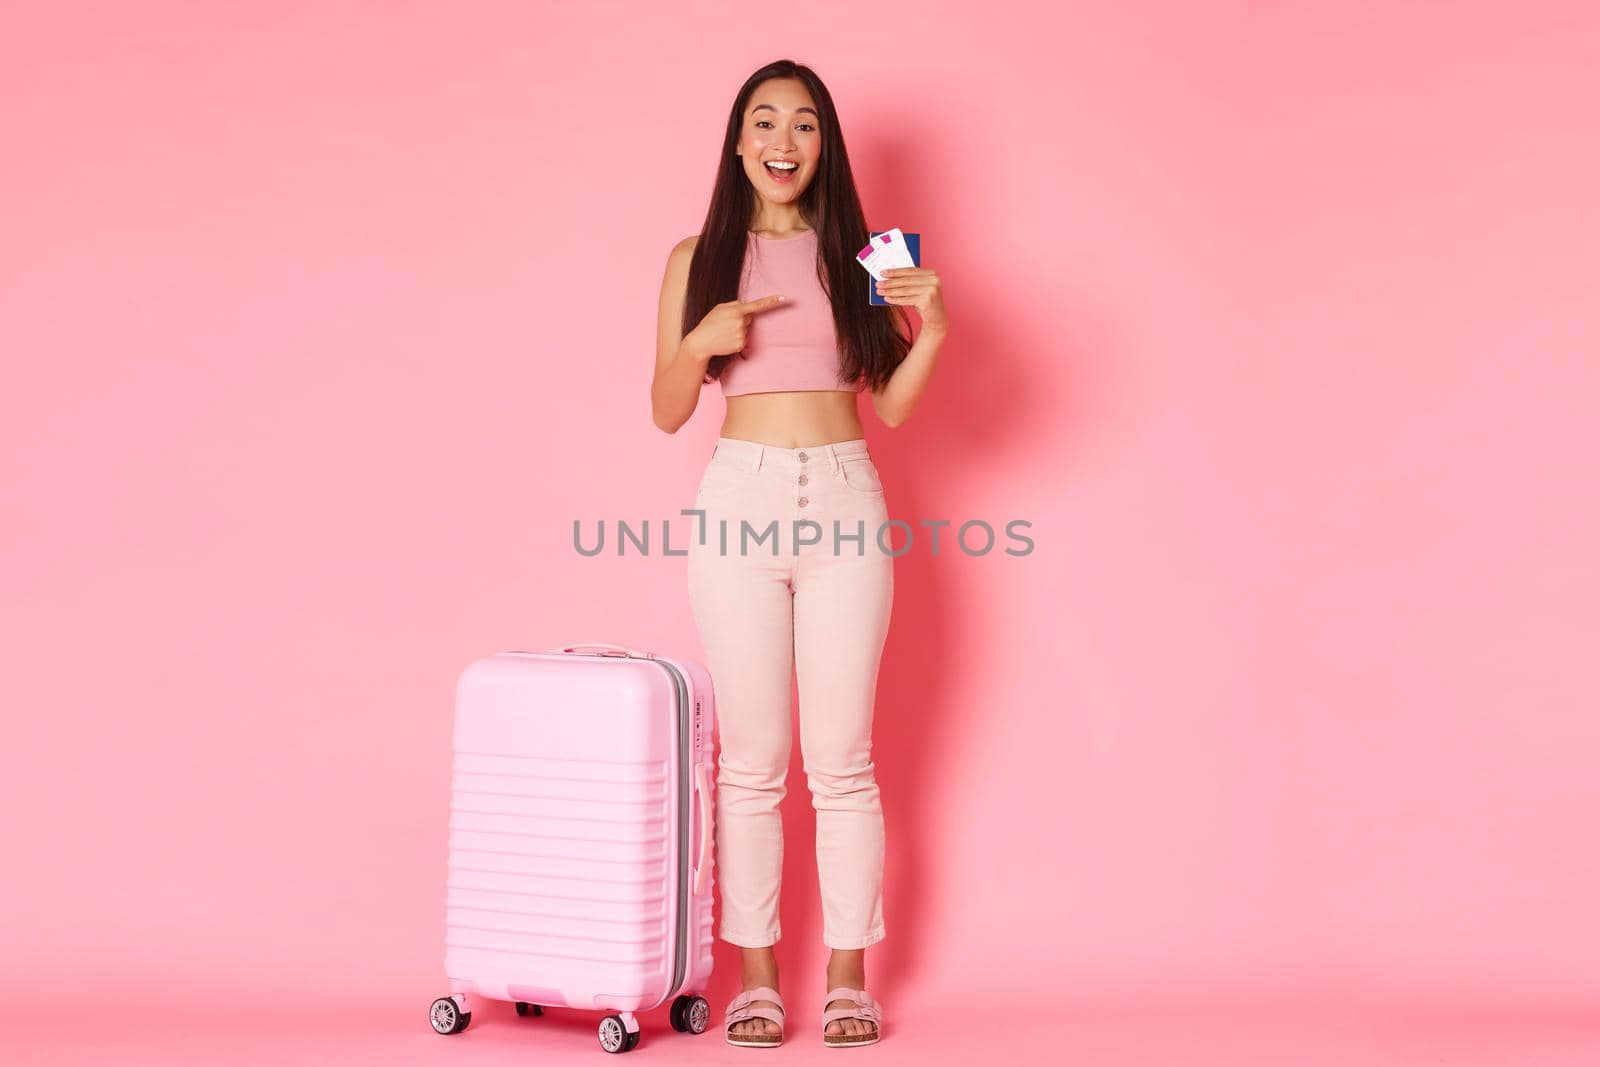 Travelling, holidays and vacation concept. Full-length of happy smiling asian girl tourist standing near suitcase, pointing finger at airline flight tickets and passport, pink background.